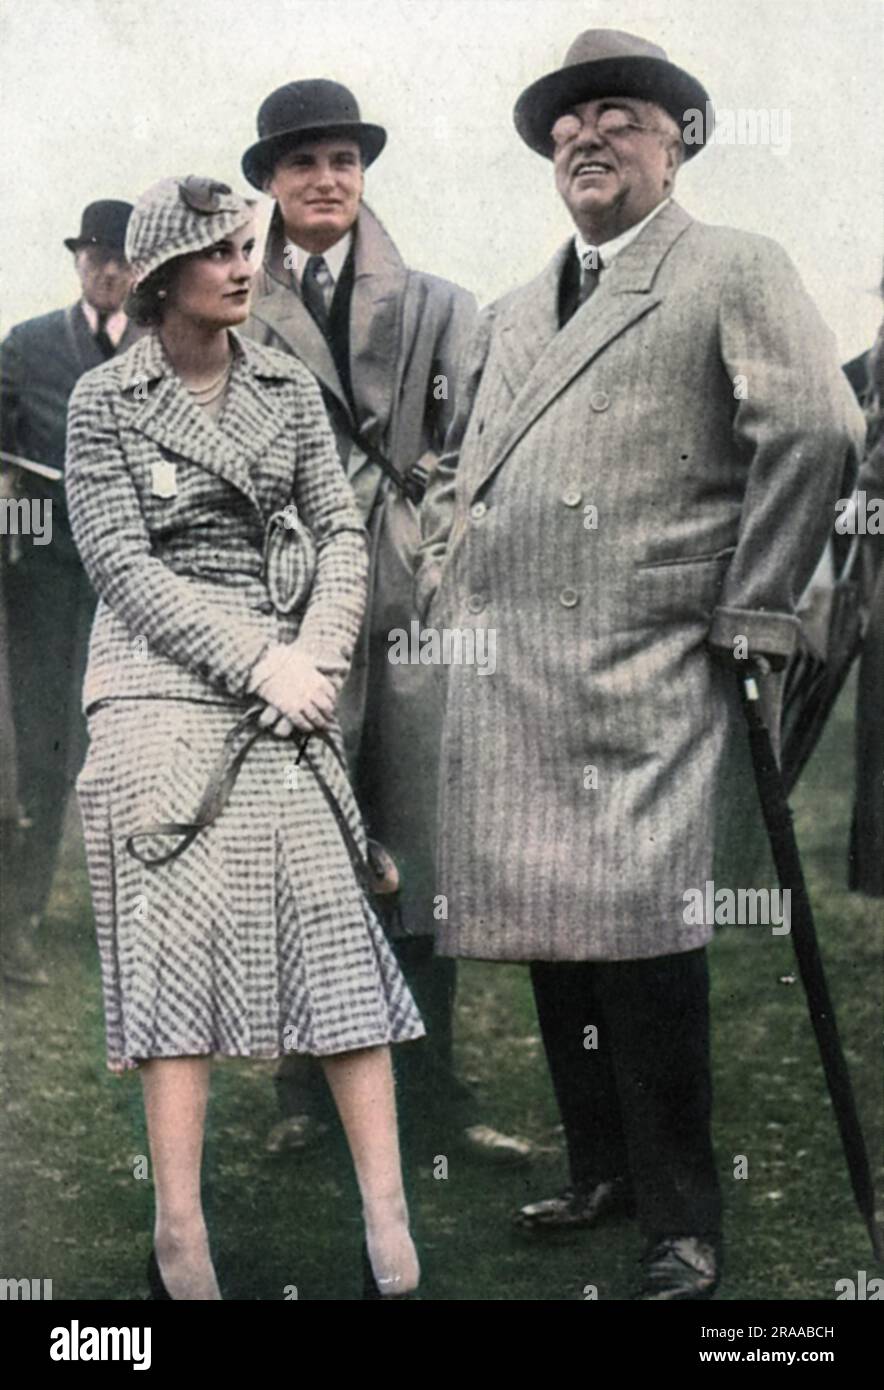 Miss Margaret Whigham (1912-1993), later Mrs Charles Sweeny and then Margaret Campbell, Duchess of Argyll, pictured in 1931 at the autumn race meeting at Newbury with H.H. The Prince Aga Khan, who had seven horses running at the meeting.  The Aga Khan's son, Prince Aly Khan, had fallen in love with Margaret in the previous year, but the romance was discouraged by her parents.     Date: 1931 Stock Photo